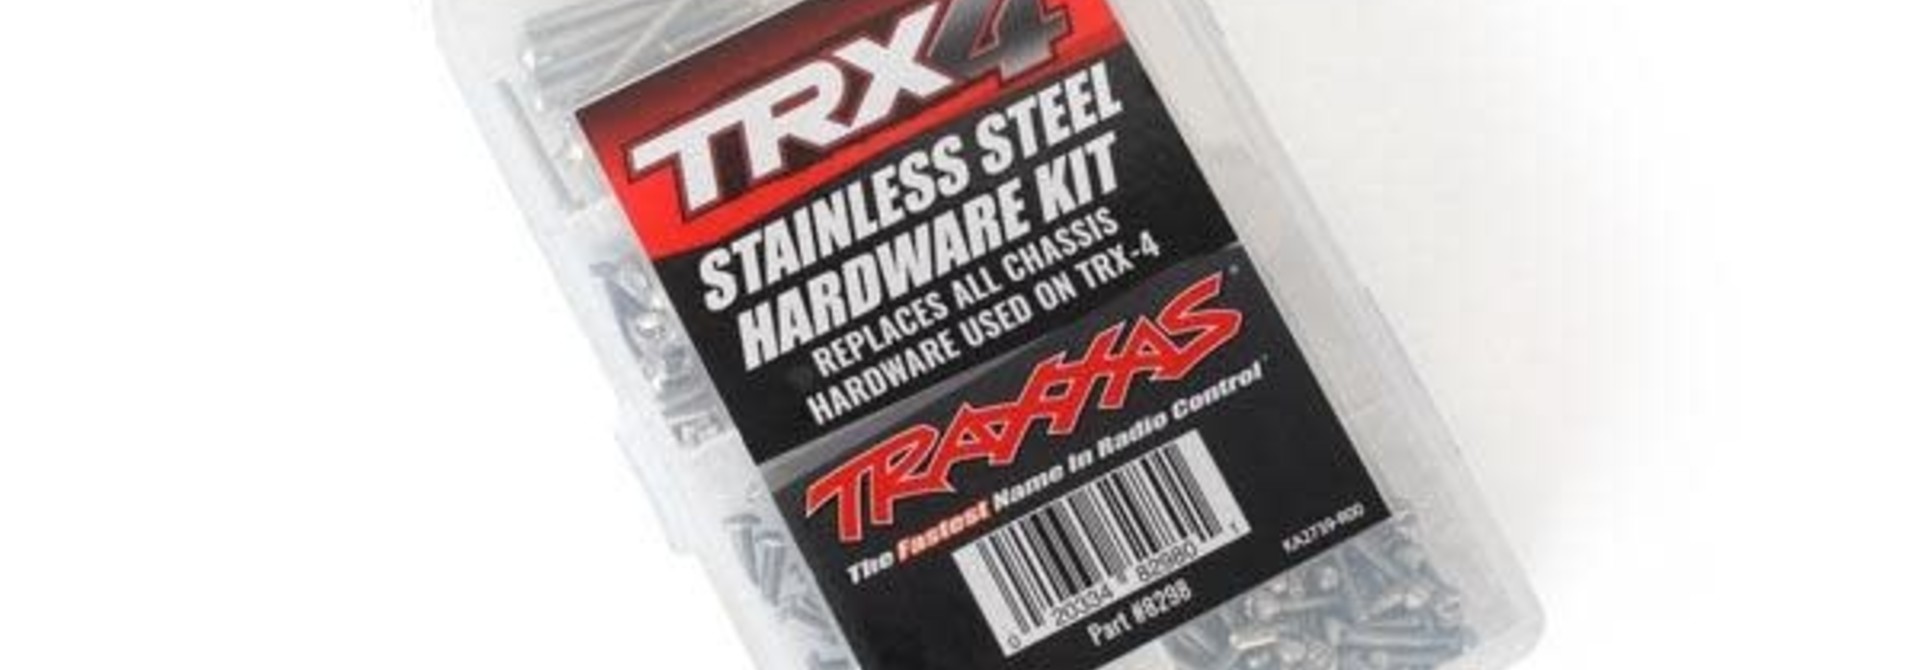 Hardware kit, stainless steel, TRX-4 (contains all stainless steel hardware used